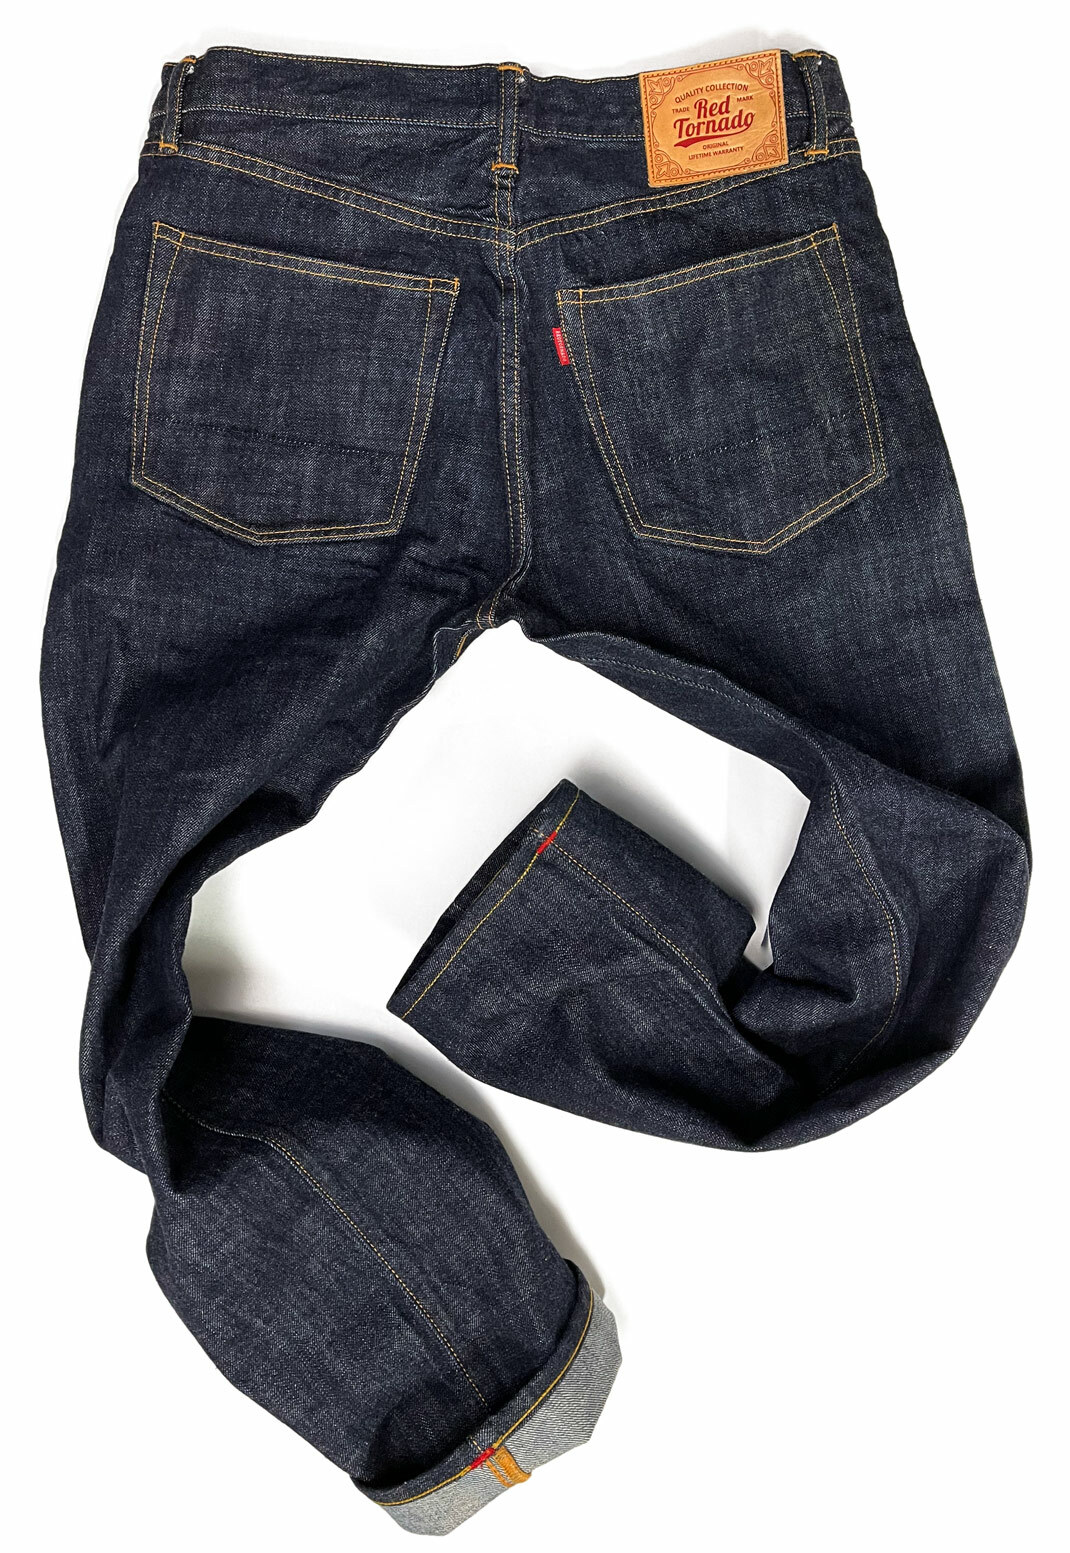 The back view of the Red Tornado selvedge denim jeans features well-defined contrast stitching along the pockets and seams. The jeans are artistically shaped to emphasize the chain stitch hemming the turned-up cuff, with a small red bartack detail visible on the hem. A leather brand patch on the waistband adds a finishing touch to the garment's dark denim.